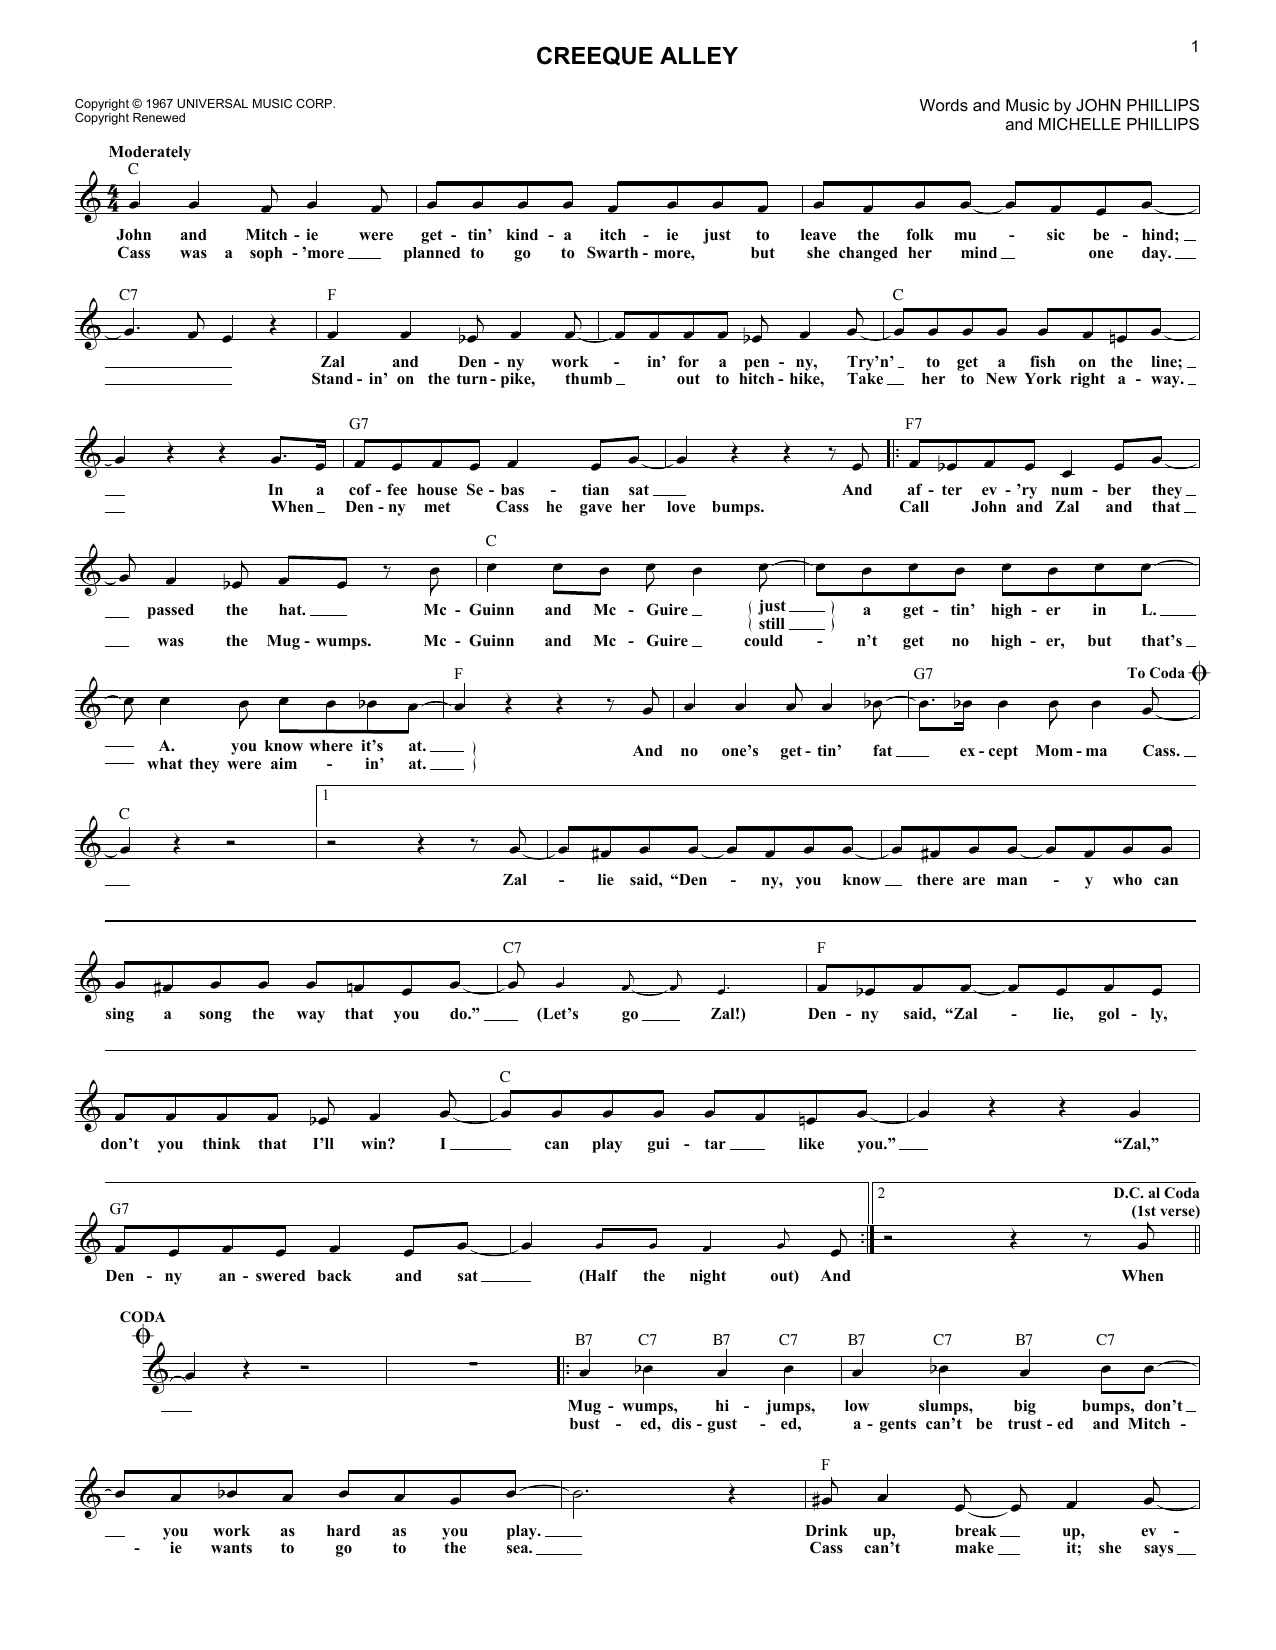 Download The Mamas & The Papas Creeque Alley Sheet Music